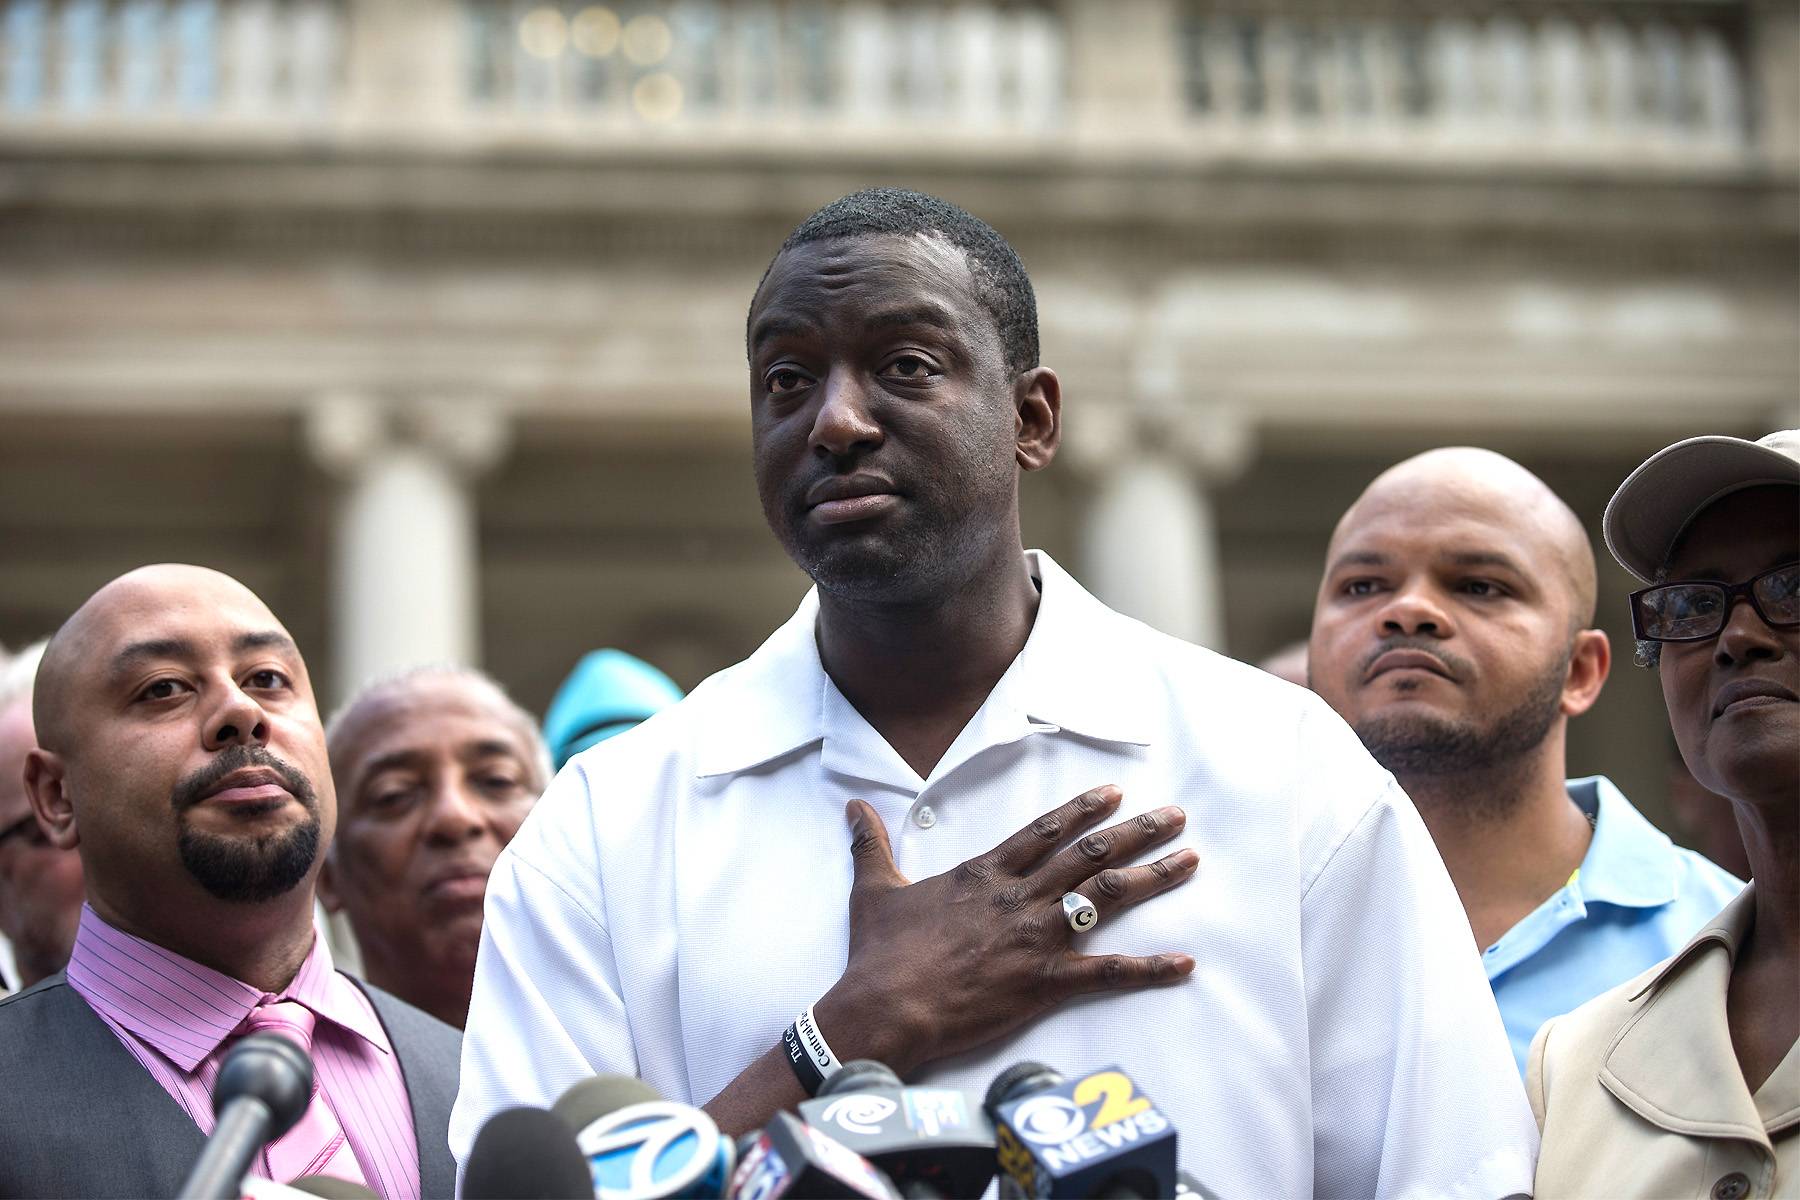 Central Park Five, New York - Kevin Richardson, Yusef Salaam, Antron McCray, Raymond Santana and Korey Wise were all convicted of the rape of a 28-year-old Central Park jogger in 1989. In 2002, Matias Reyes confessed that he alone was responsible for the attack and the five men were released on December 19, 2002, in this highly publicized case.&nbsp;(Photo: Andrew Burton/Getty Images)